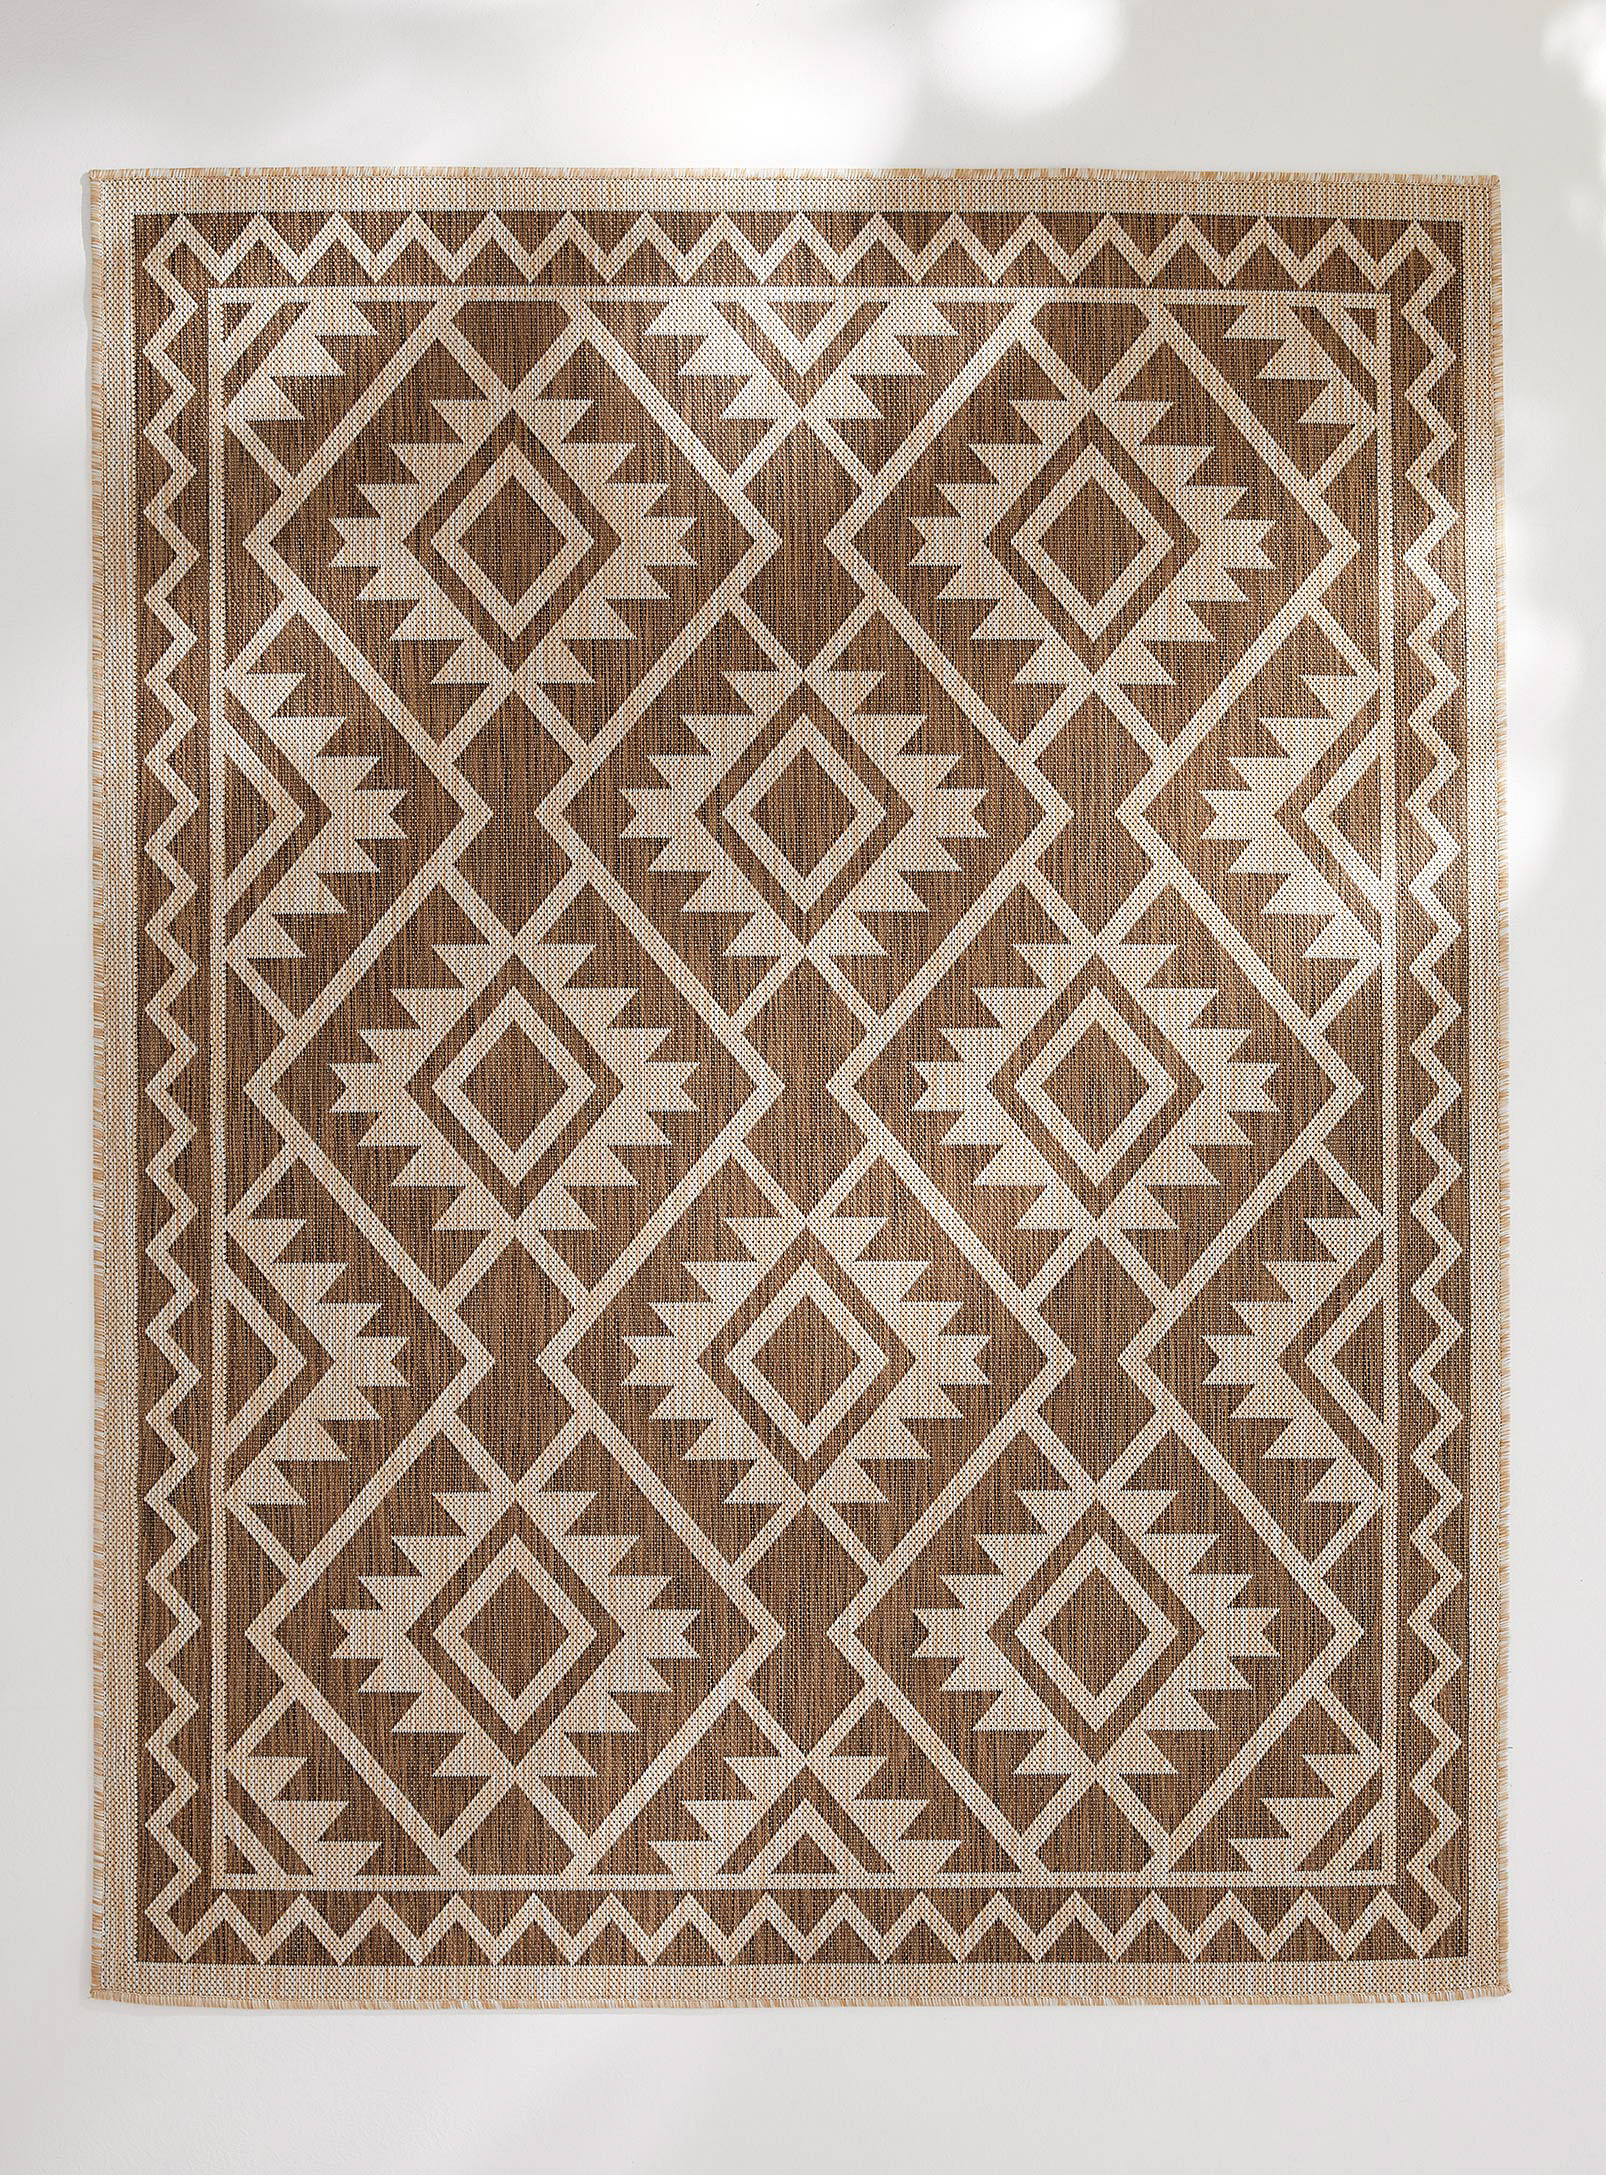 Simons Maison - Natural geometry indoor-outdoor rug See available sizes